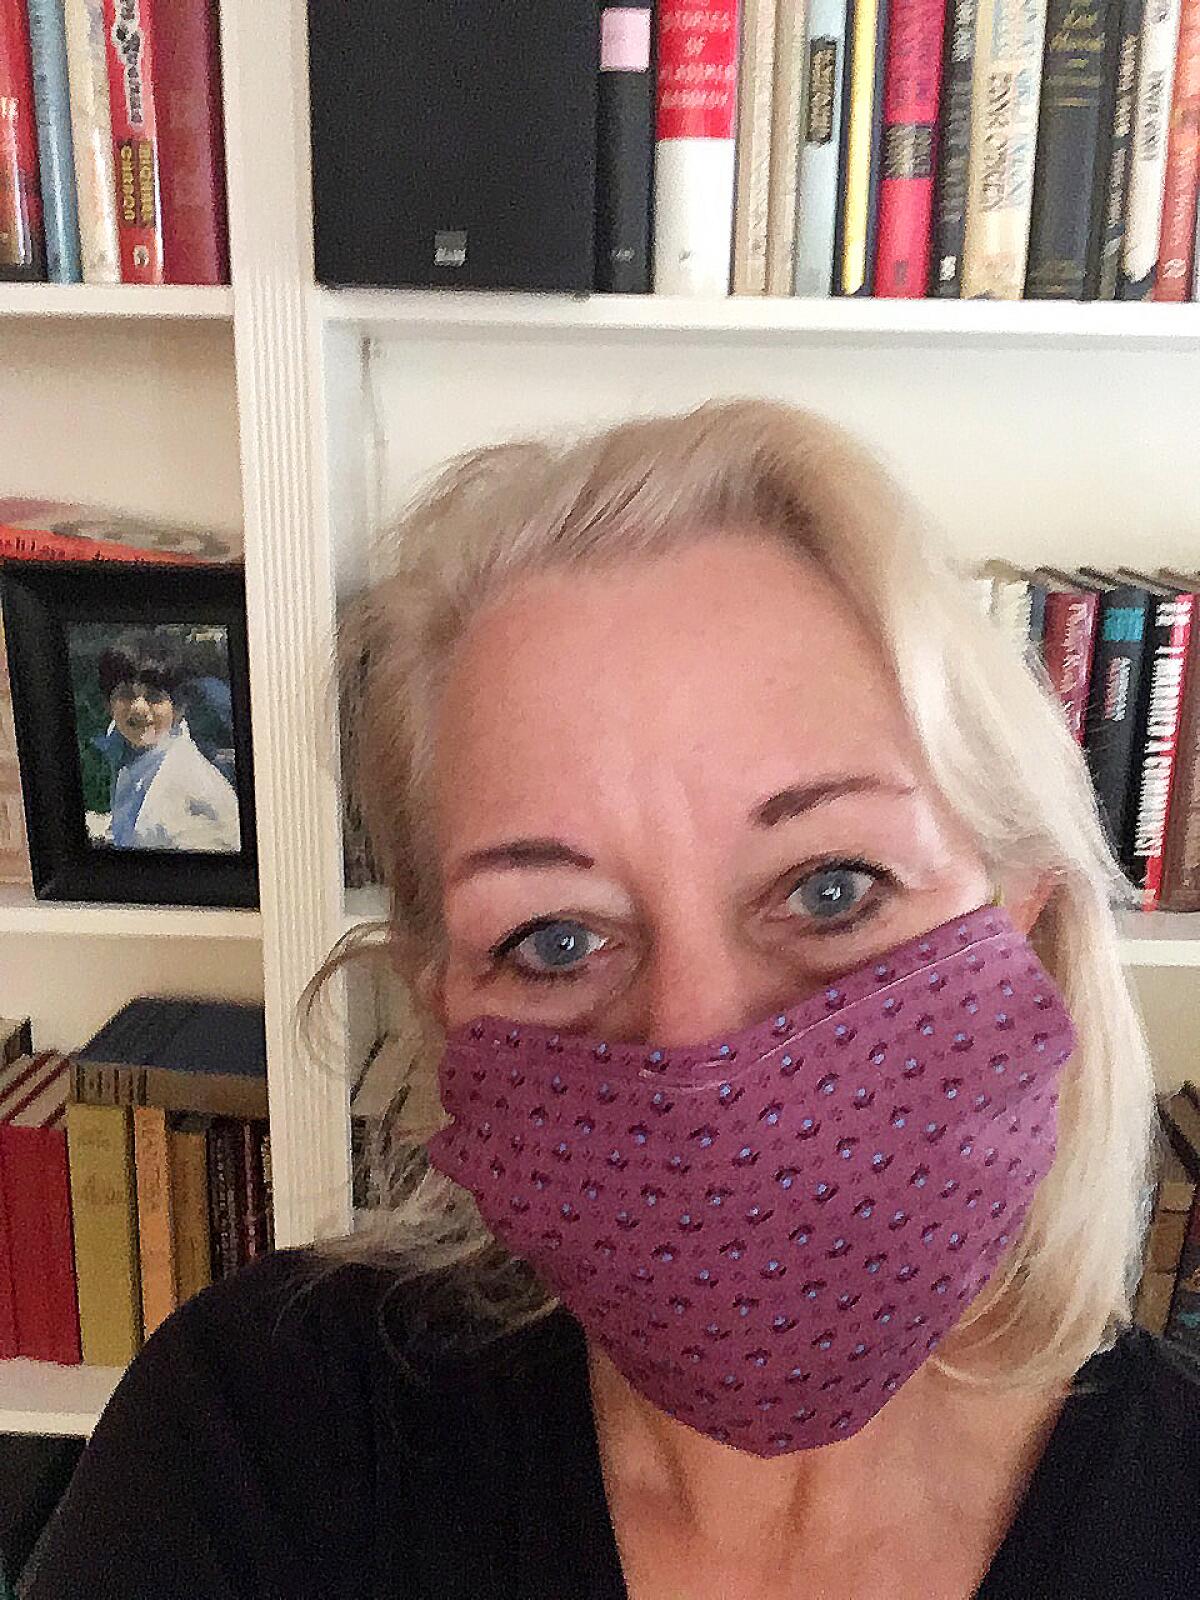 Laura Lipppman sports a no-sew mask she learned how to make on Twitter out of a quilt she started 37 years ago.